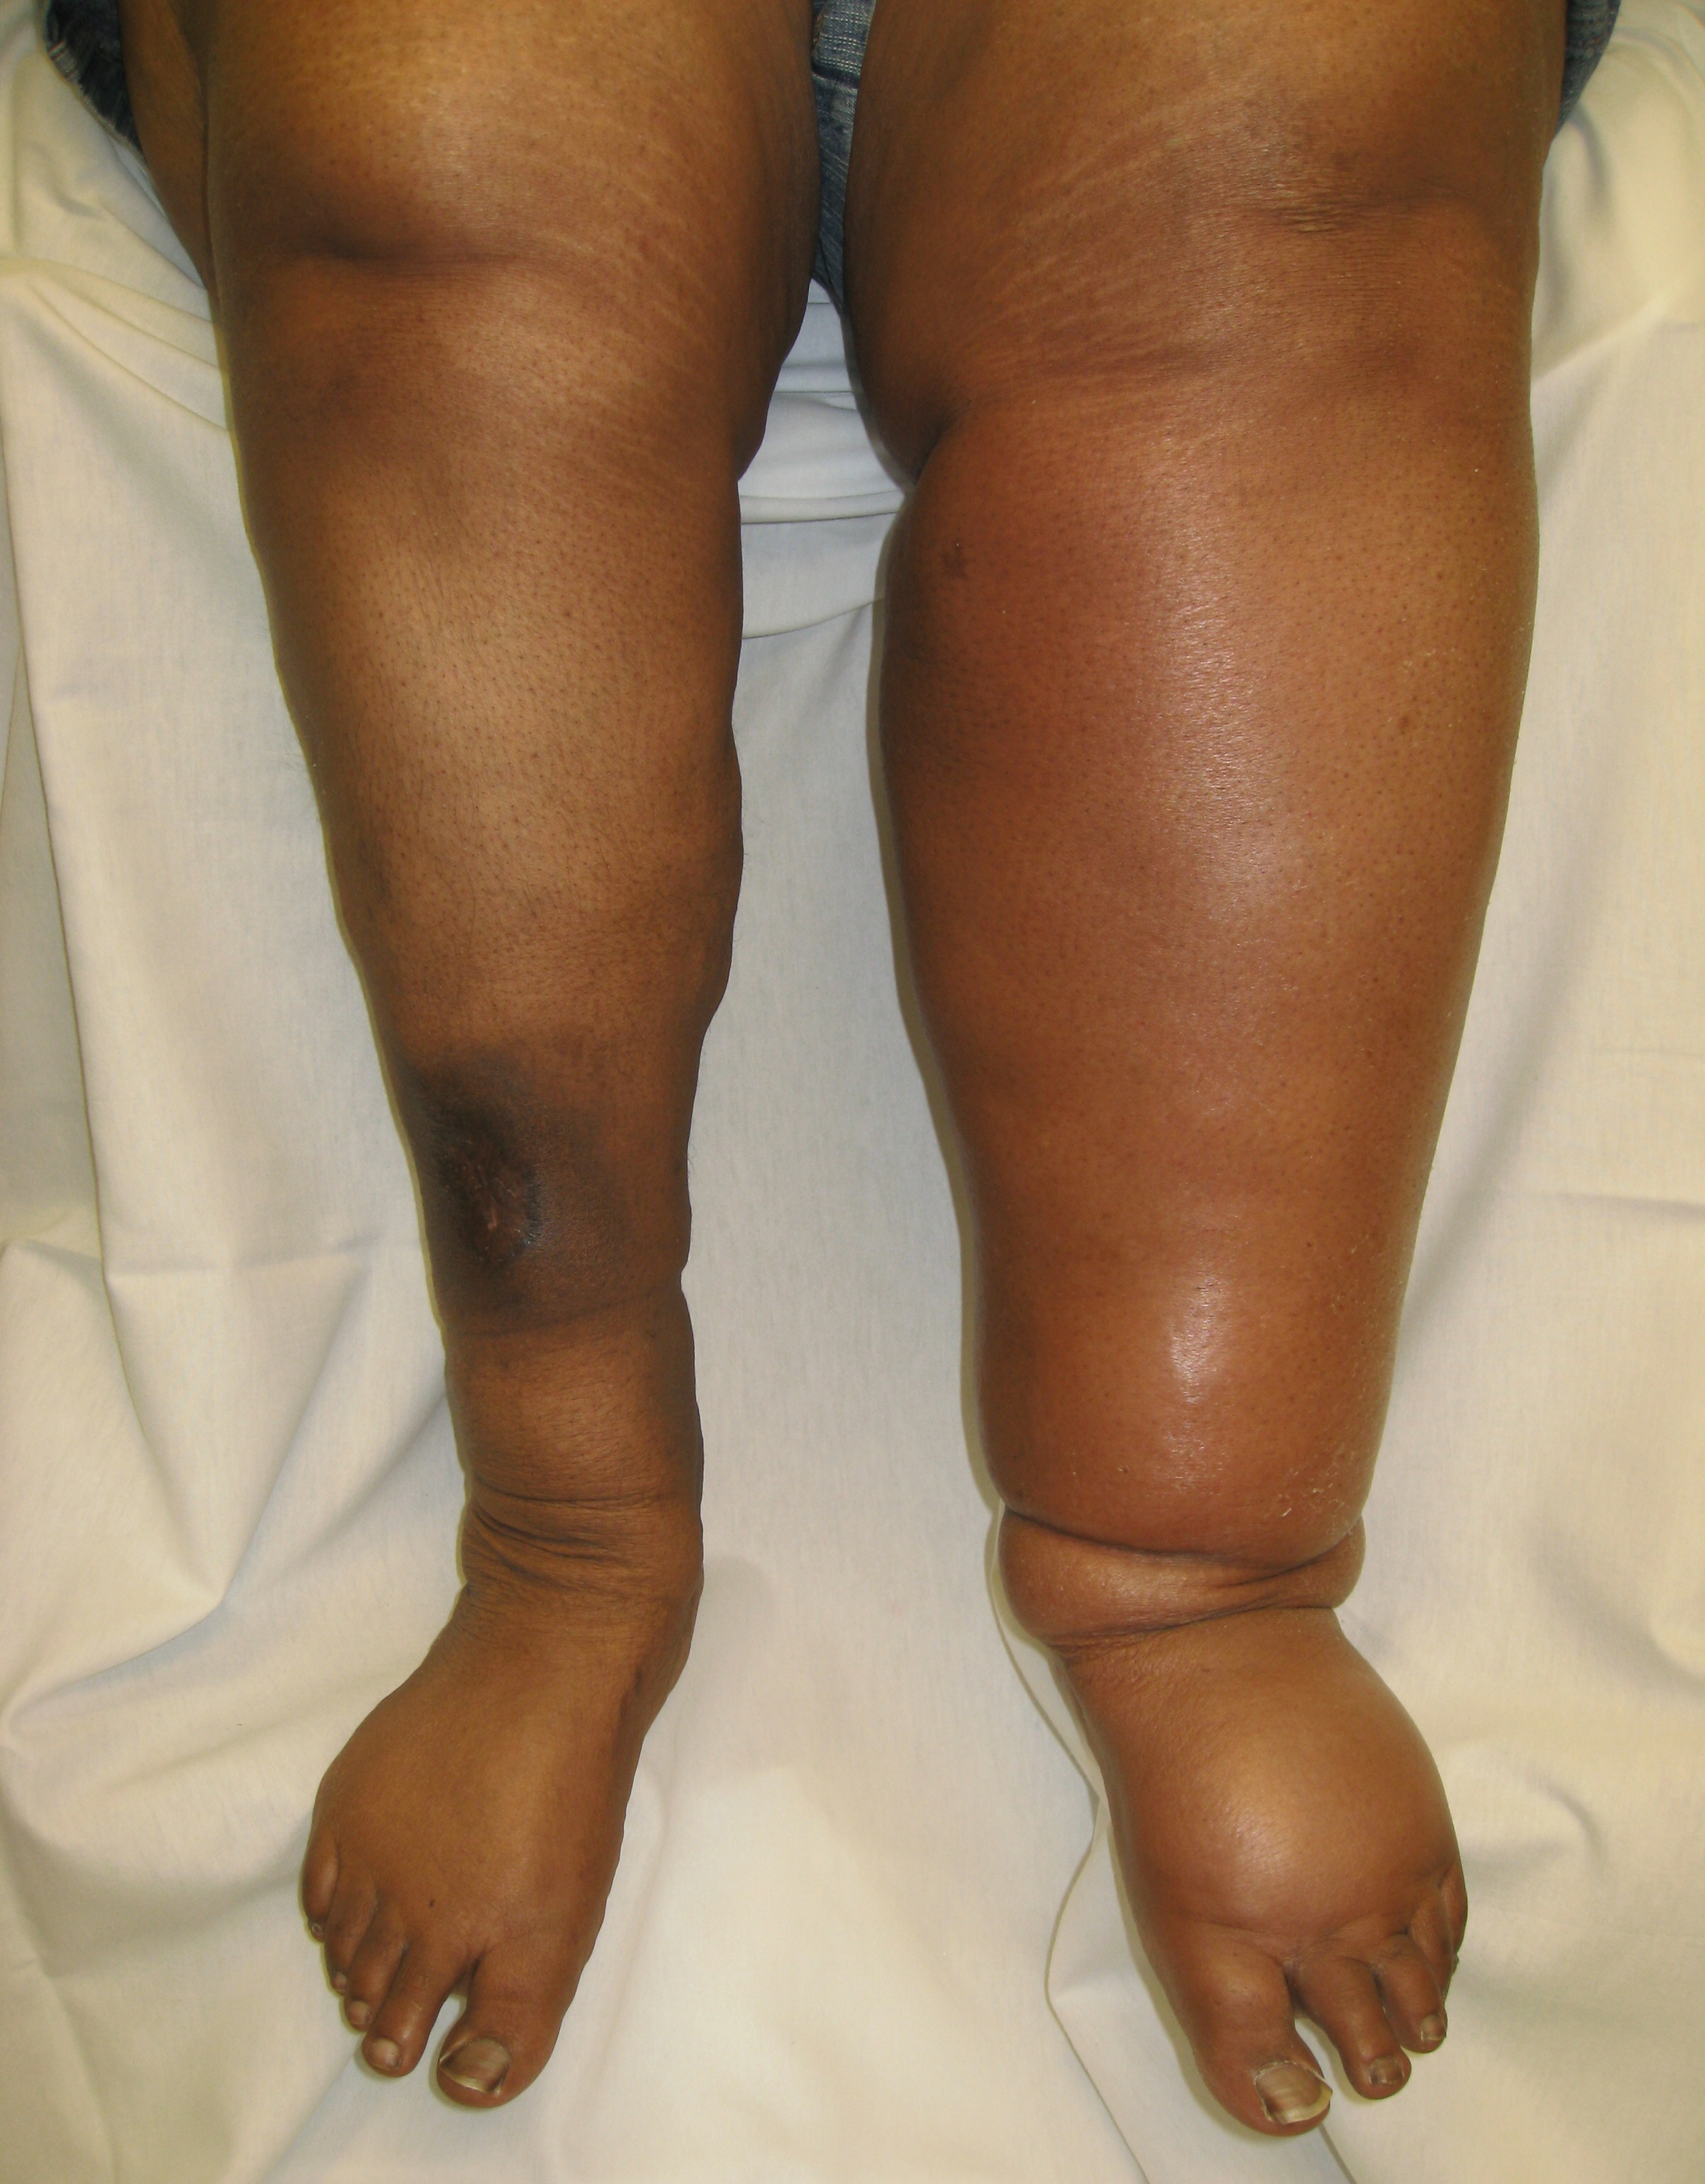 How to Treat Swollen Legs & Ankles Before Turning to Vein Laser Surgery